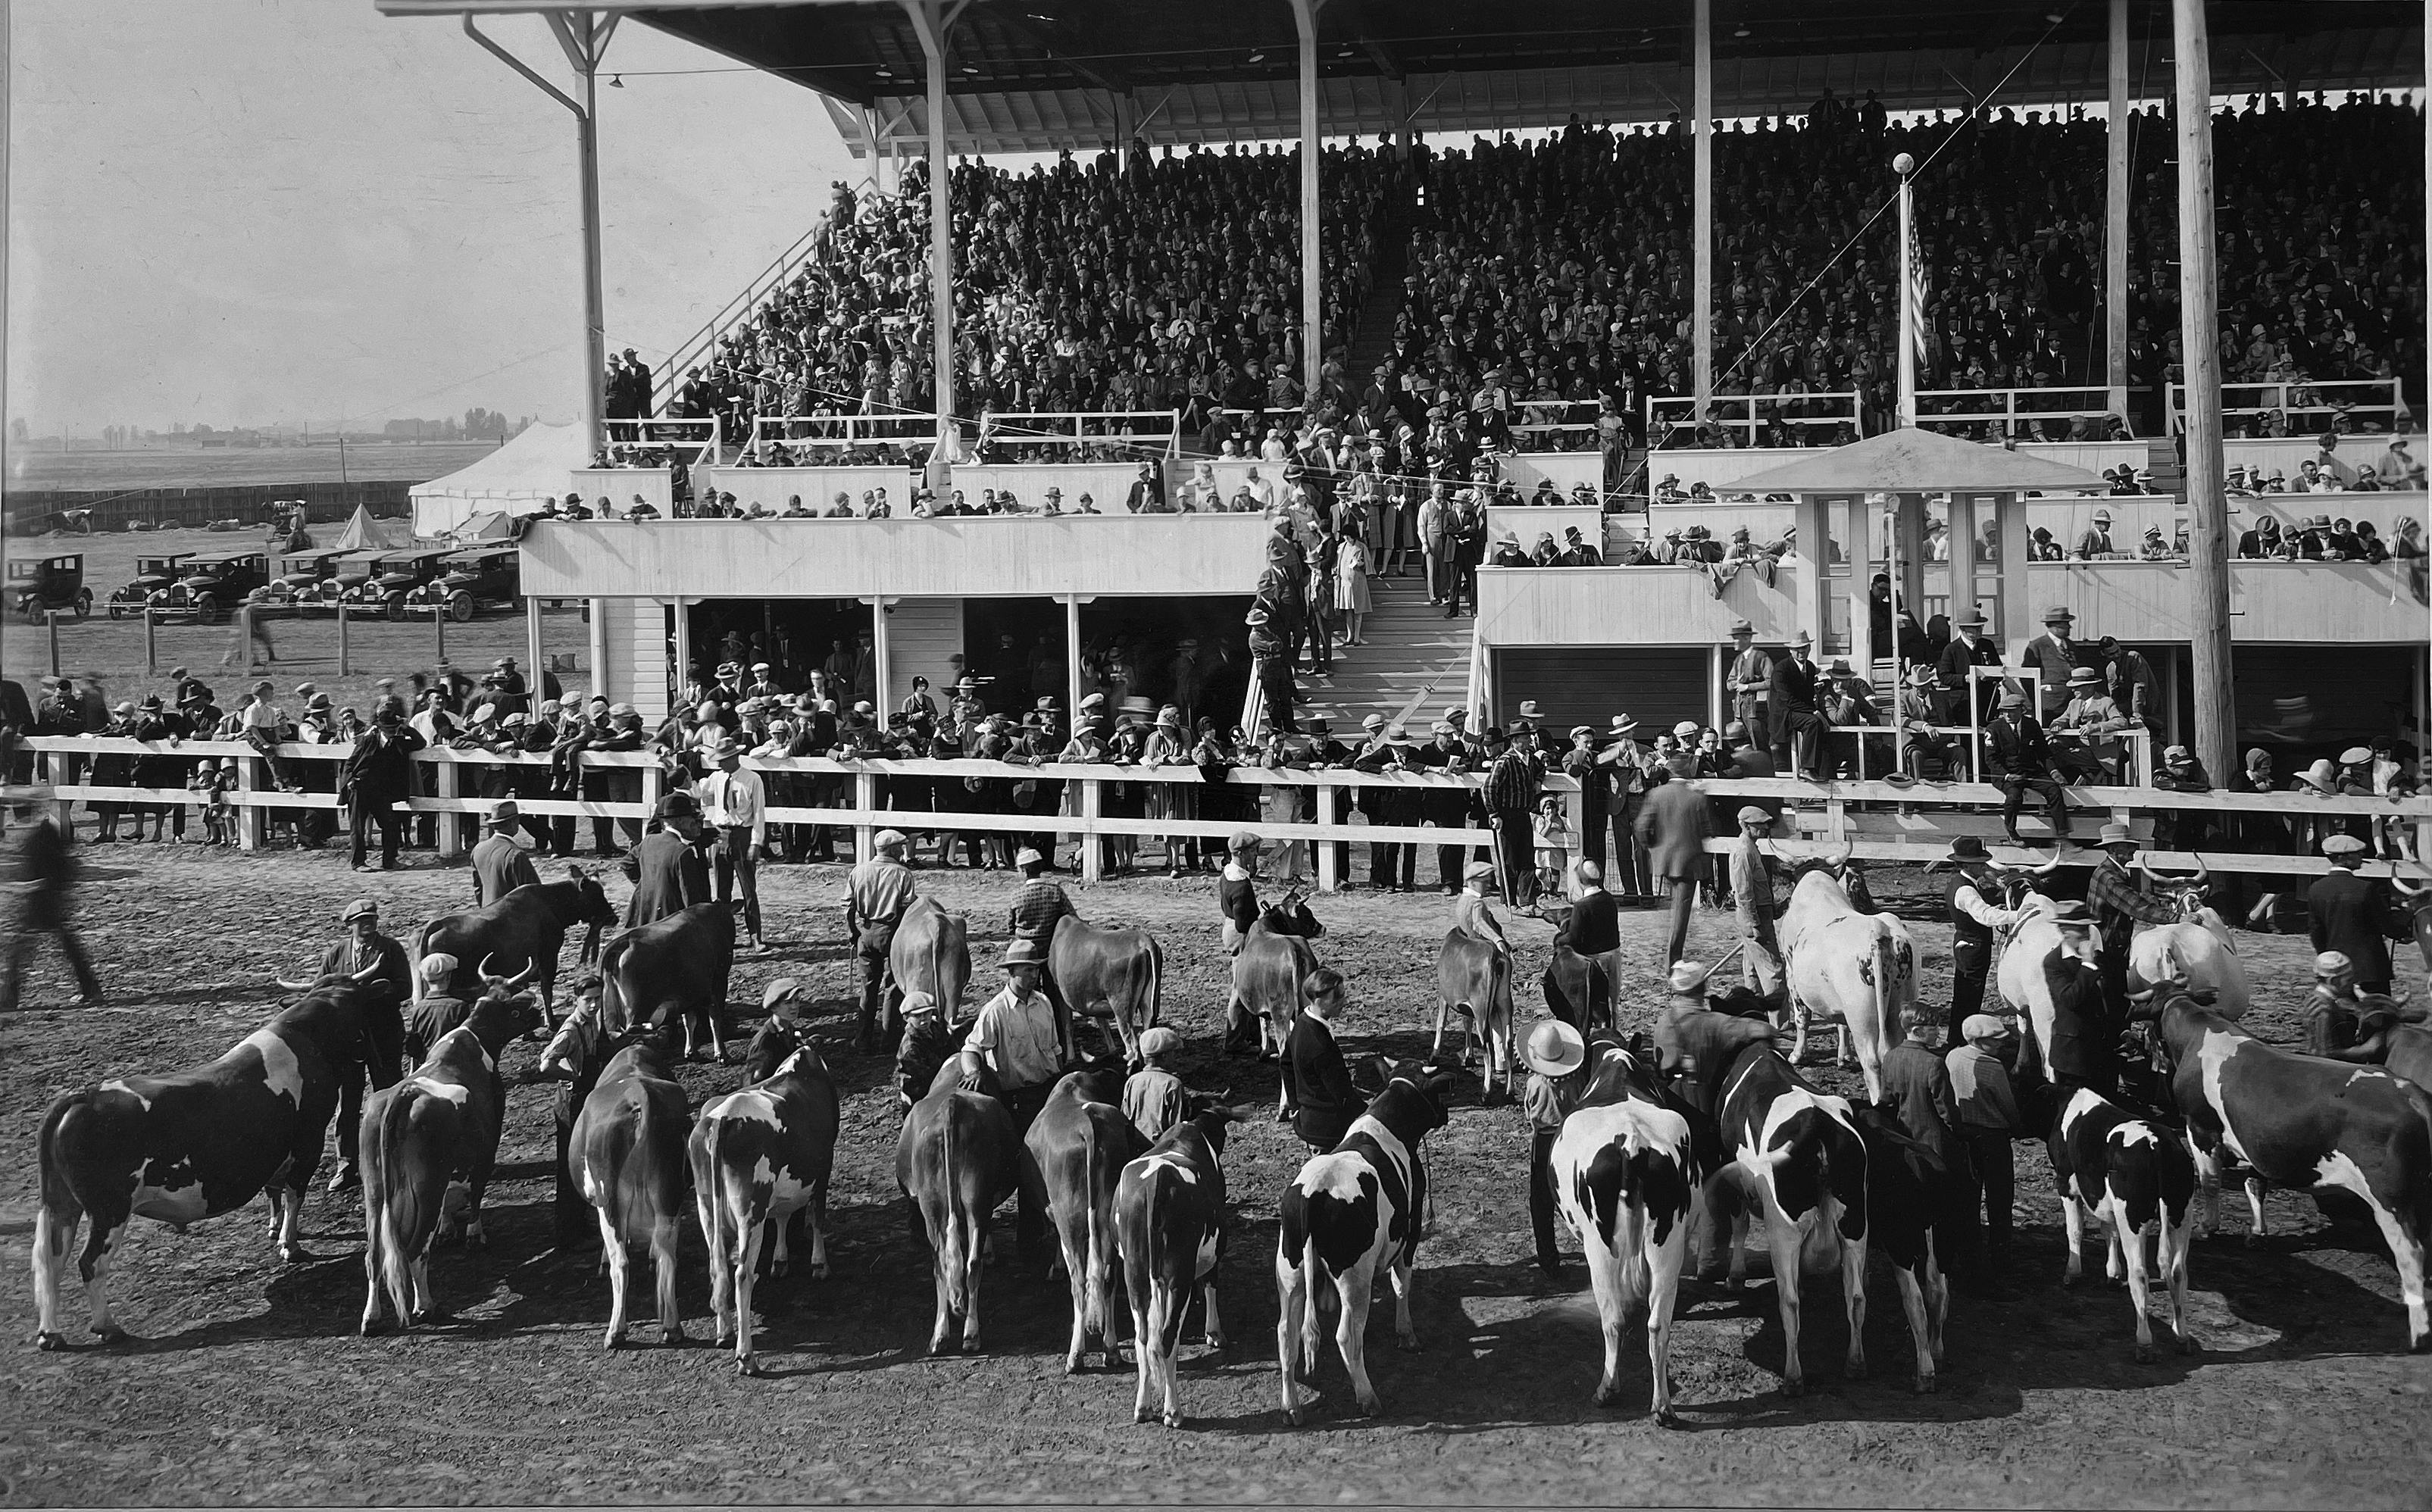 A historic black and white photo of the rodeo grandstands and arena with livestock lined up.